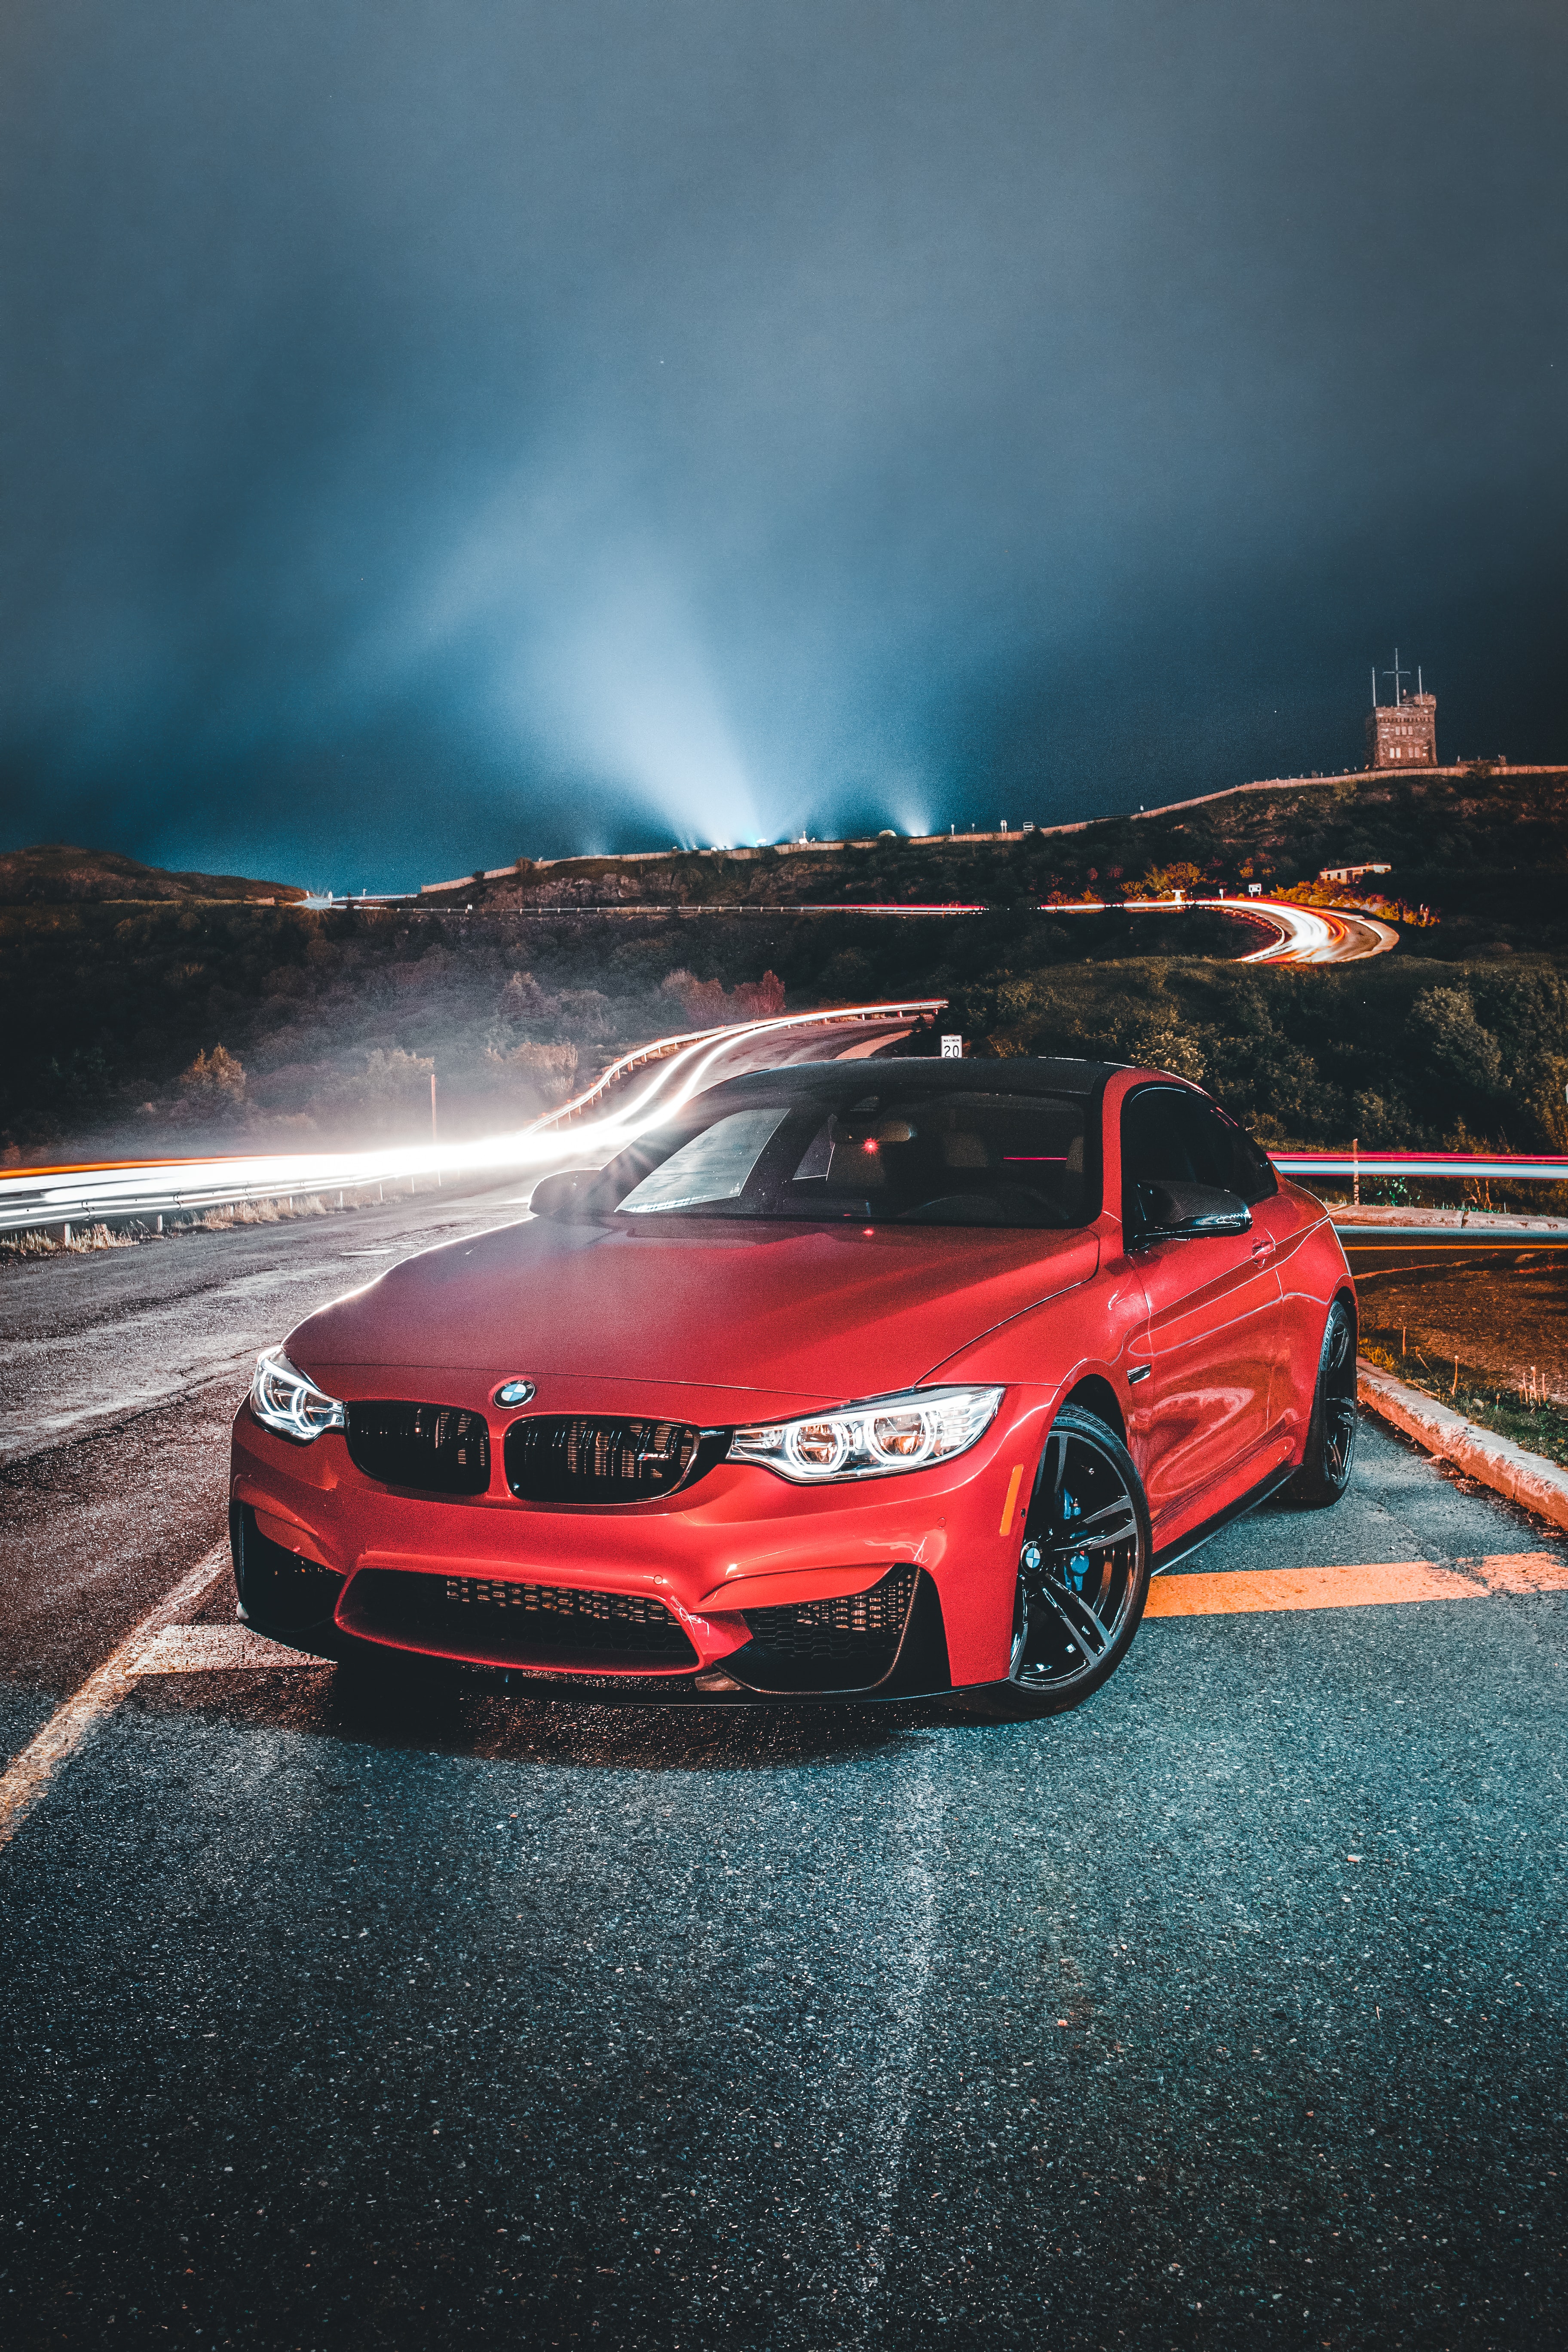 bmw, cars, bmw 320i, front view, machine, red, road, car